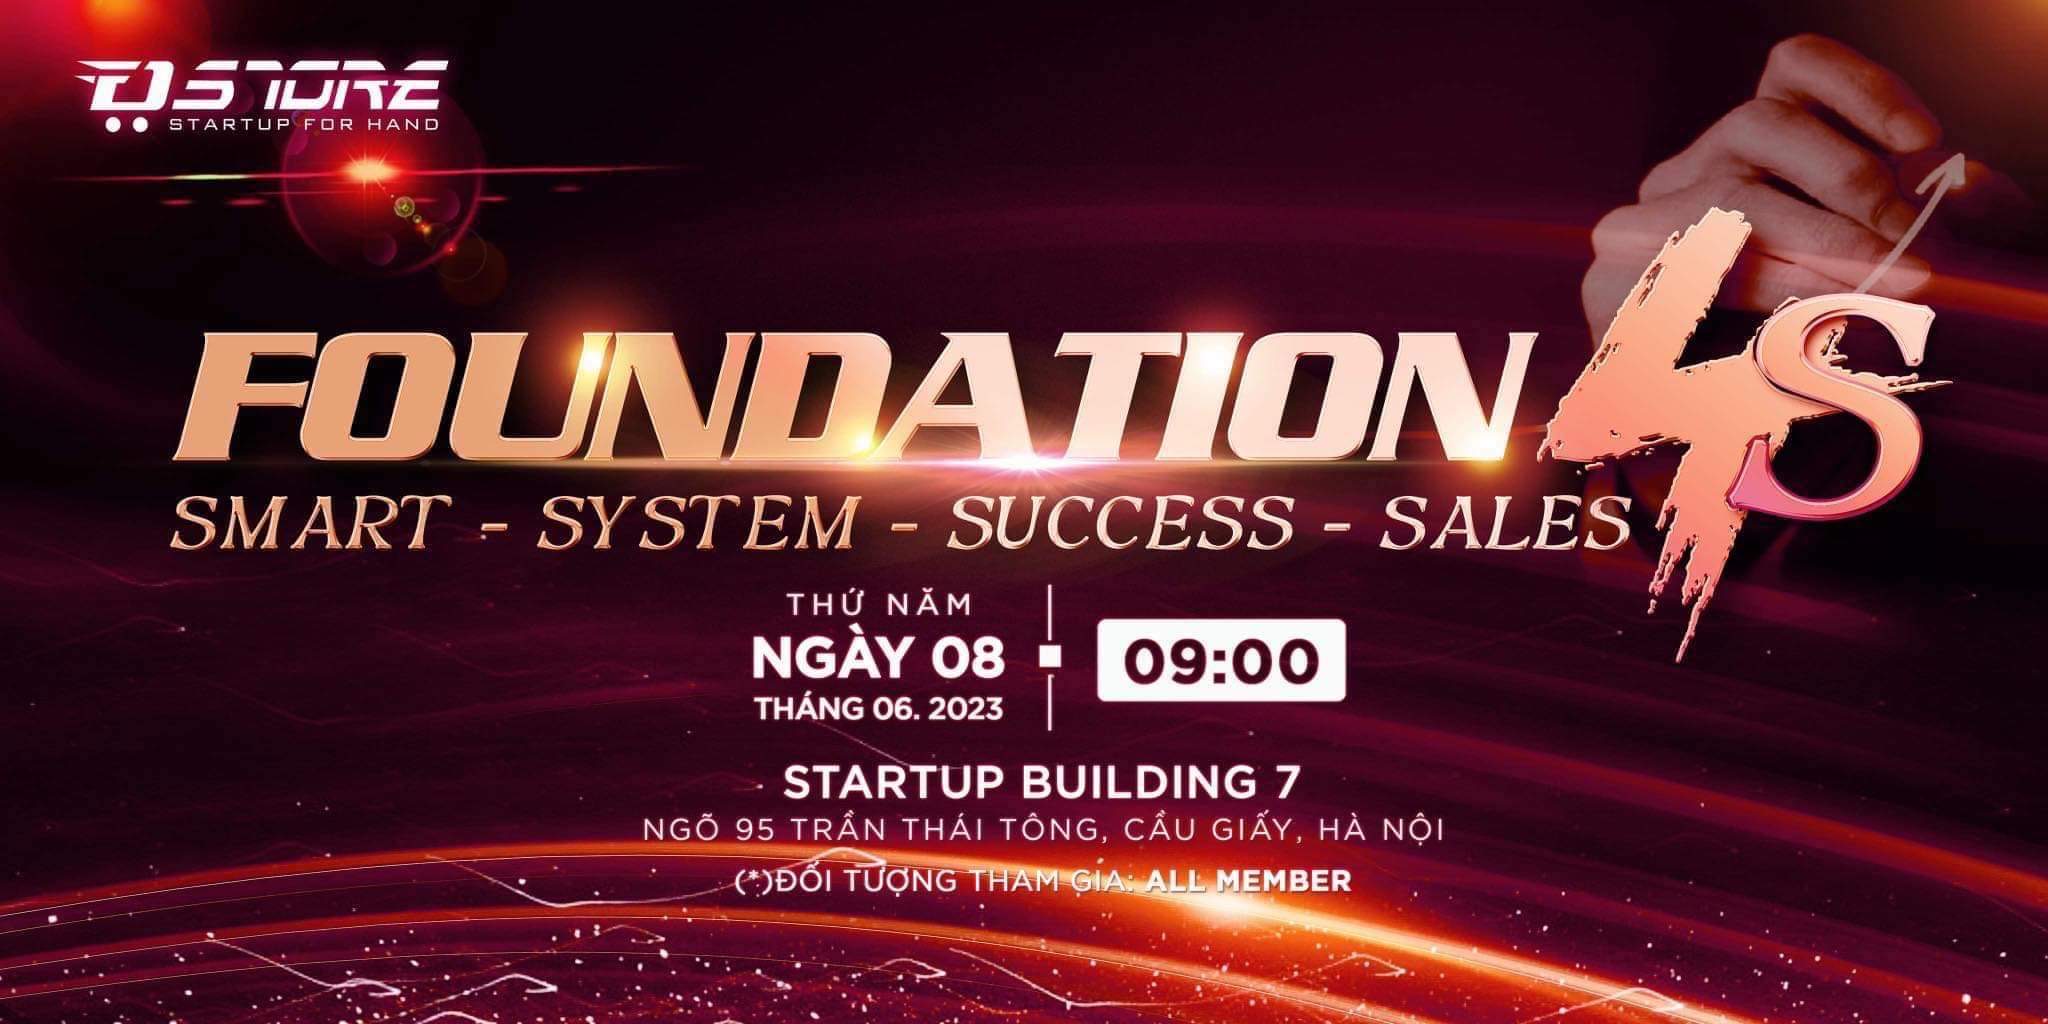 FOUNDATIONS 4S  DSTORE HÀ NỘI - SMART - SYSTEM -SUCCESS - SALES